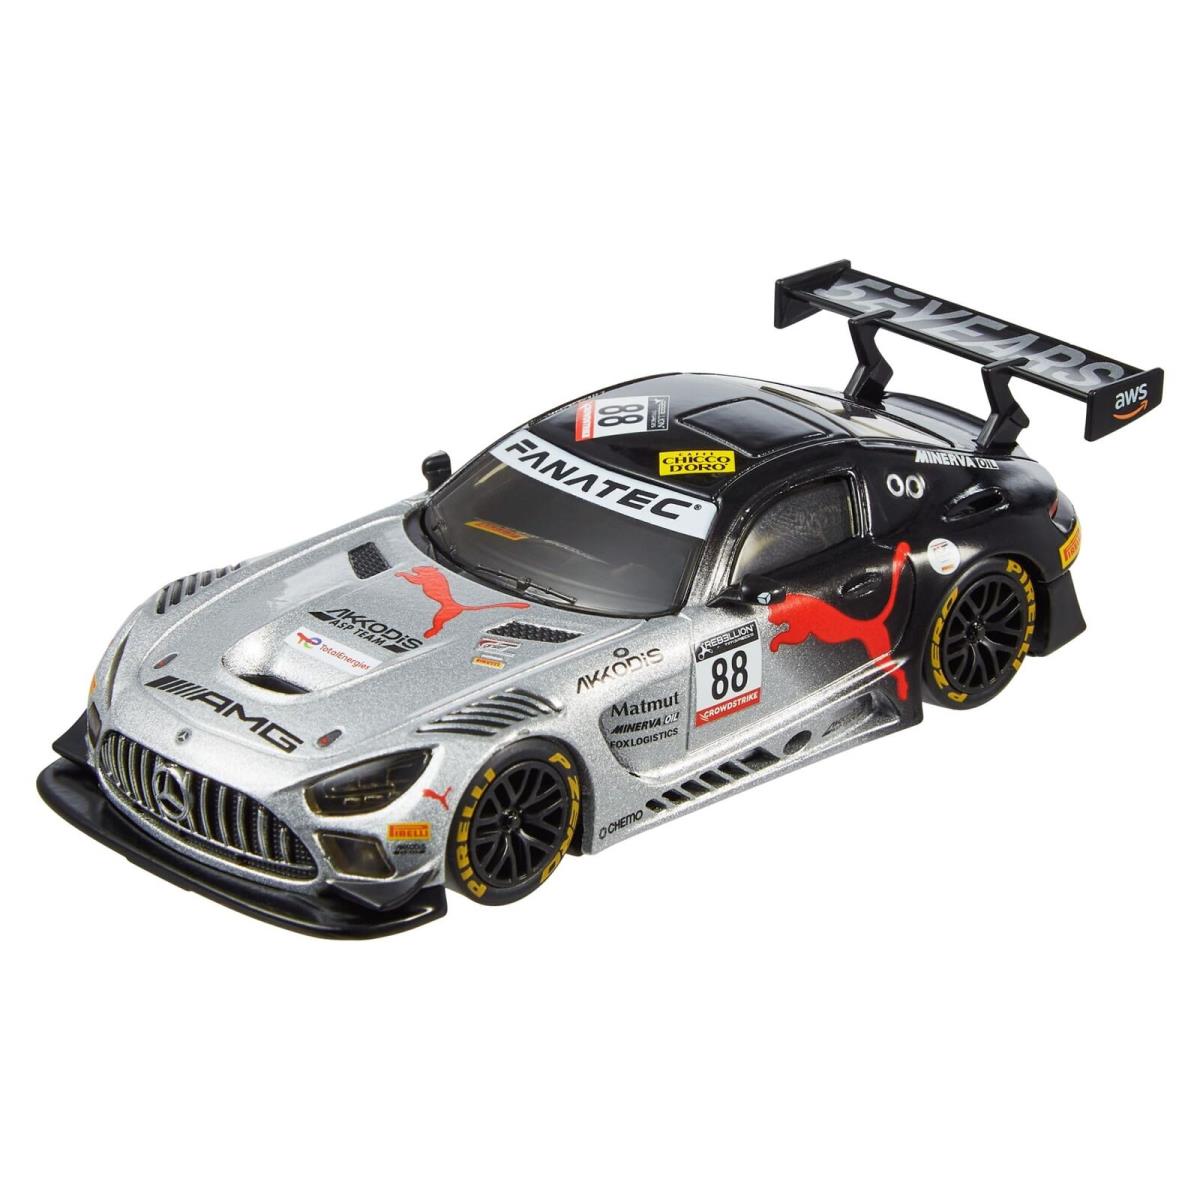 Real Riders Mercedes-amg GT3 Die Cast Car 1:43 Scale HMD44